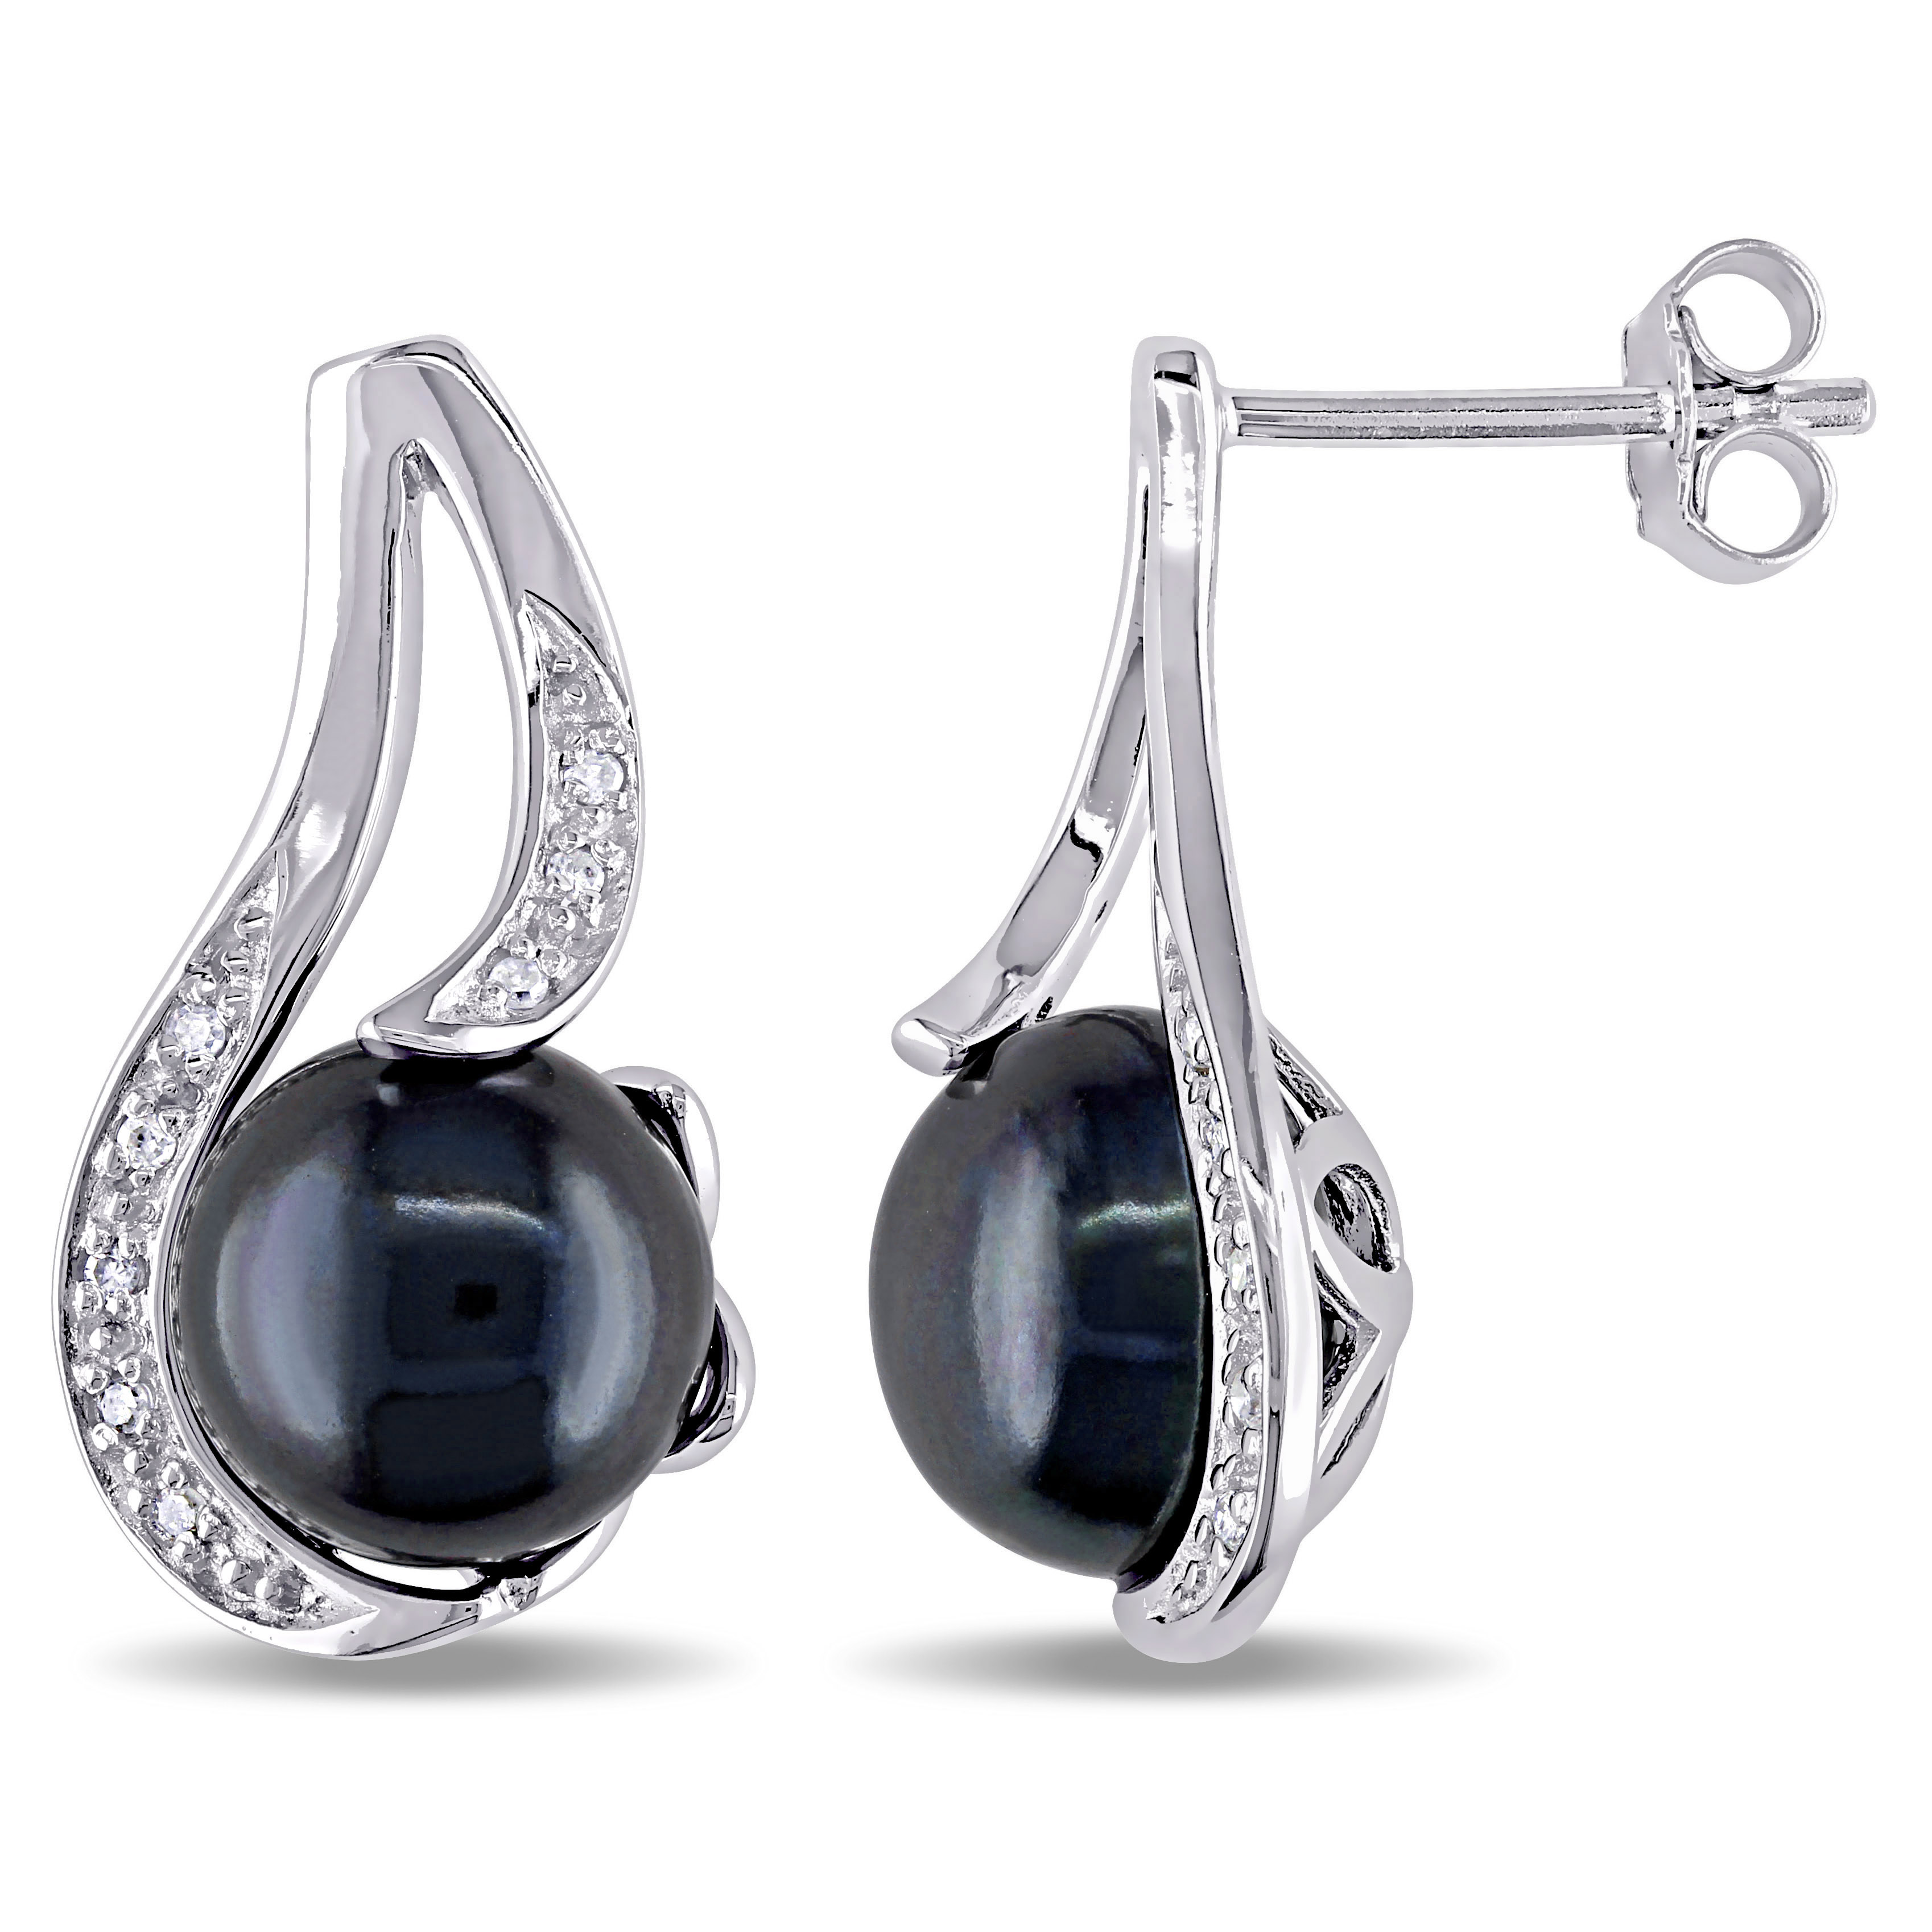 9 - 9.5 MM Black Cultured Freshwater Pearl with Diamonds Earrings in Sterling Silver